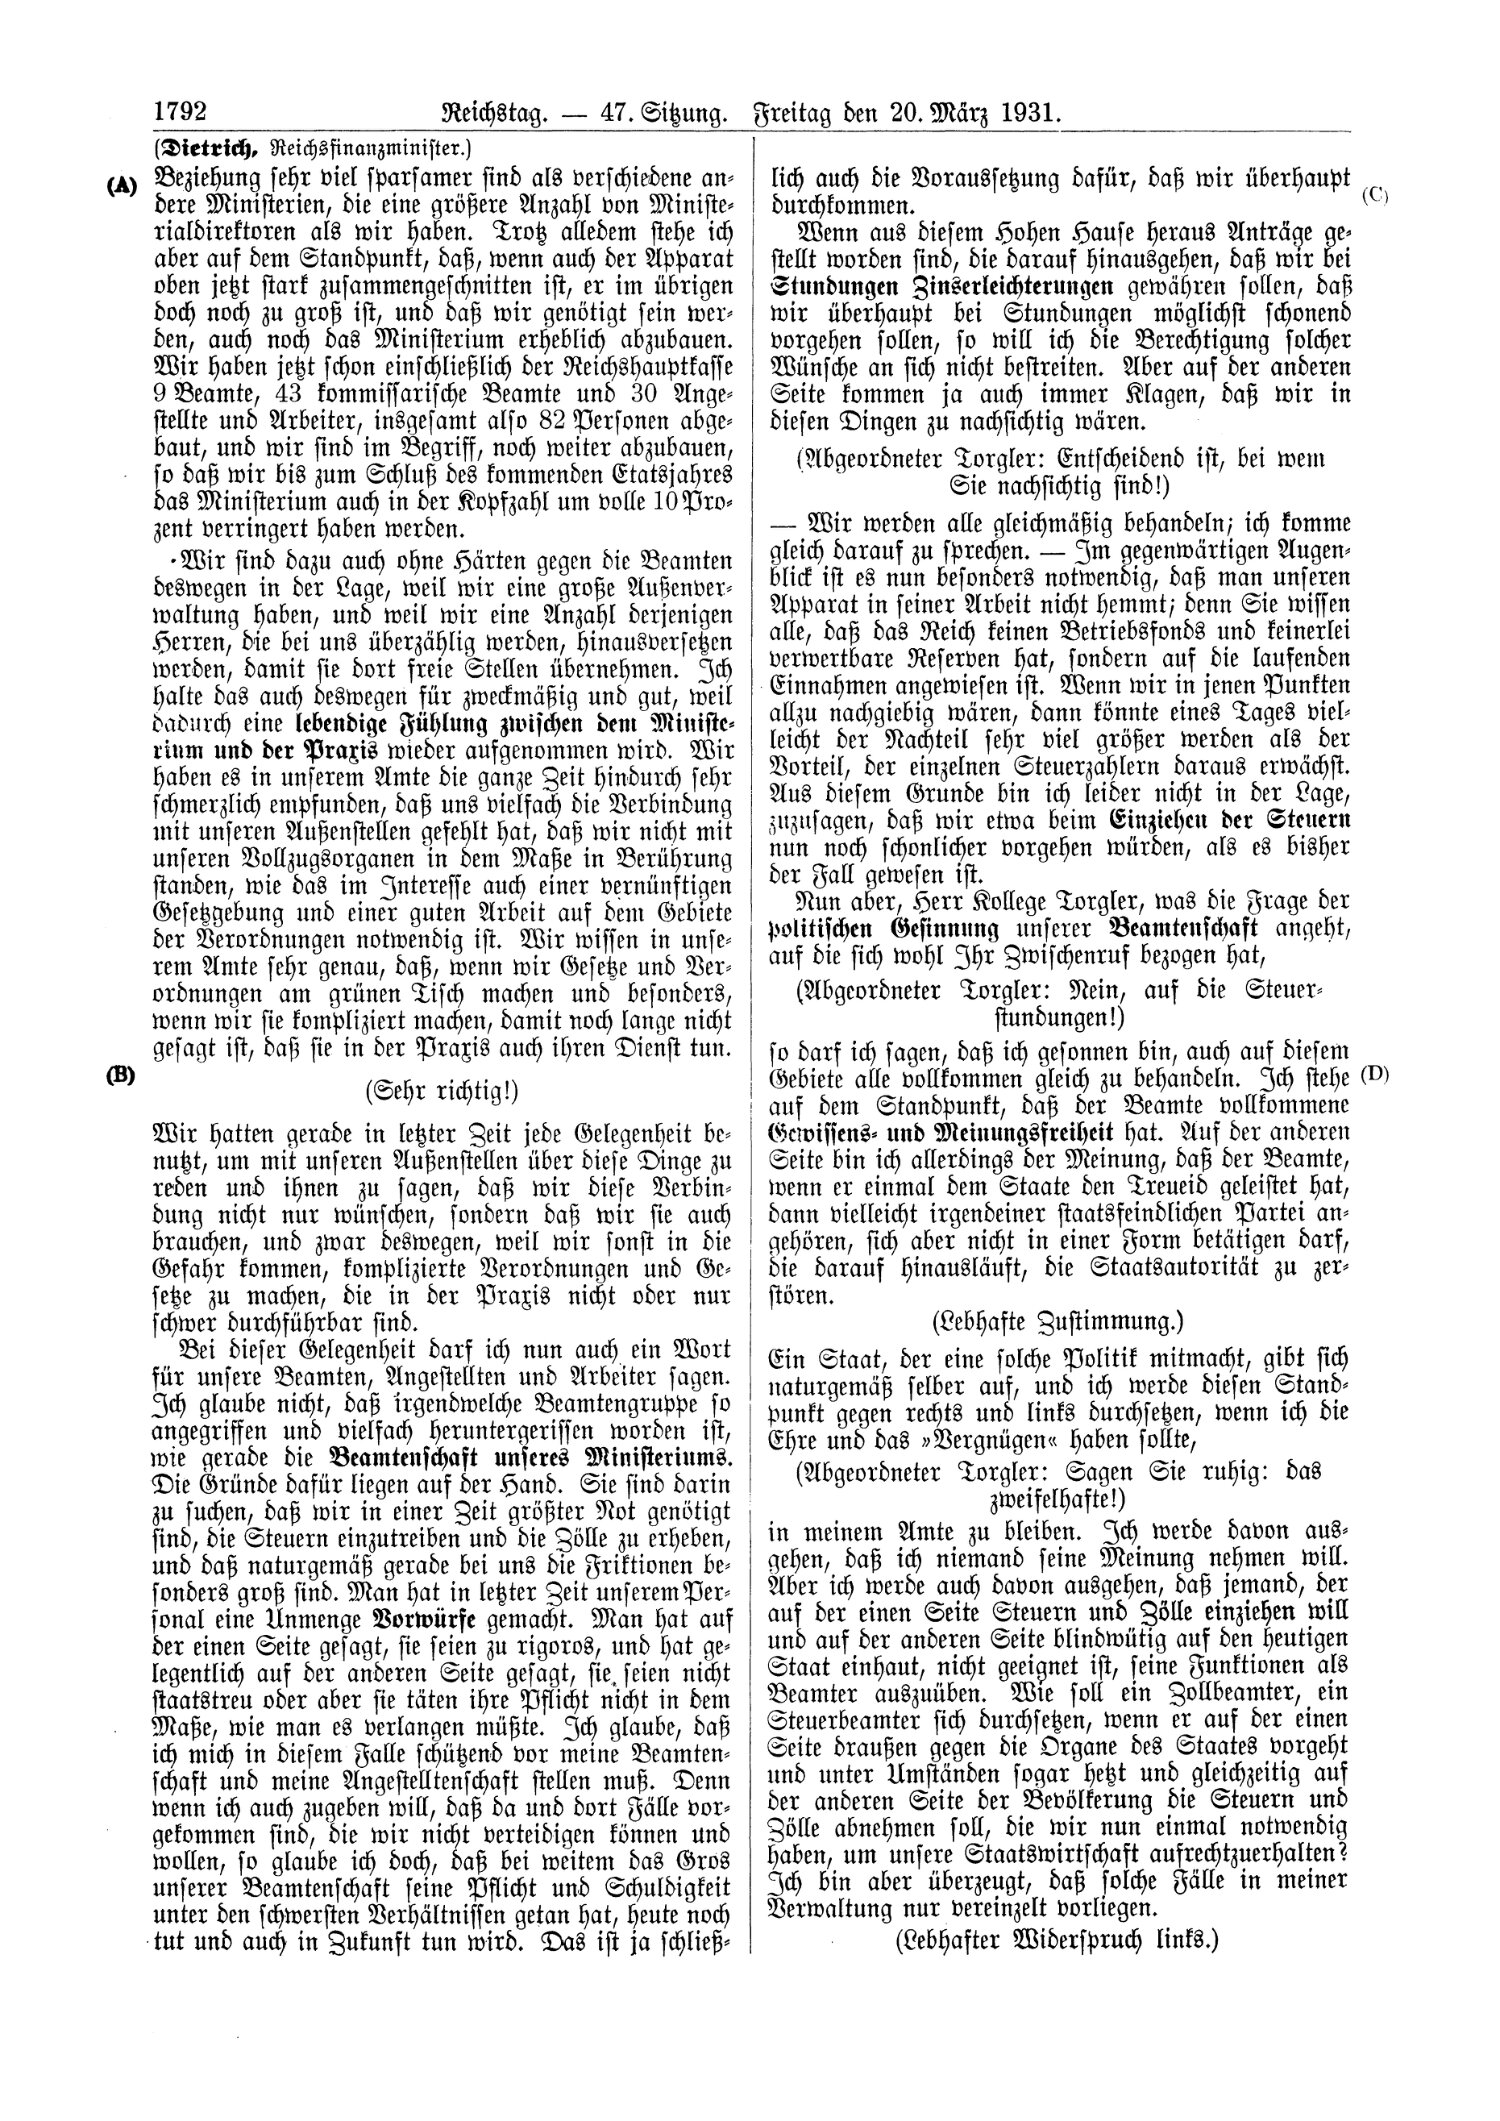 Scan of page 1792